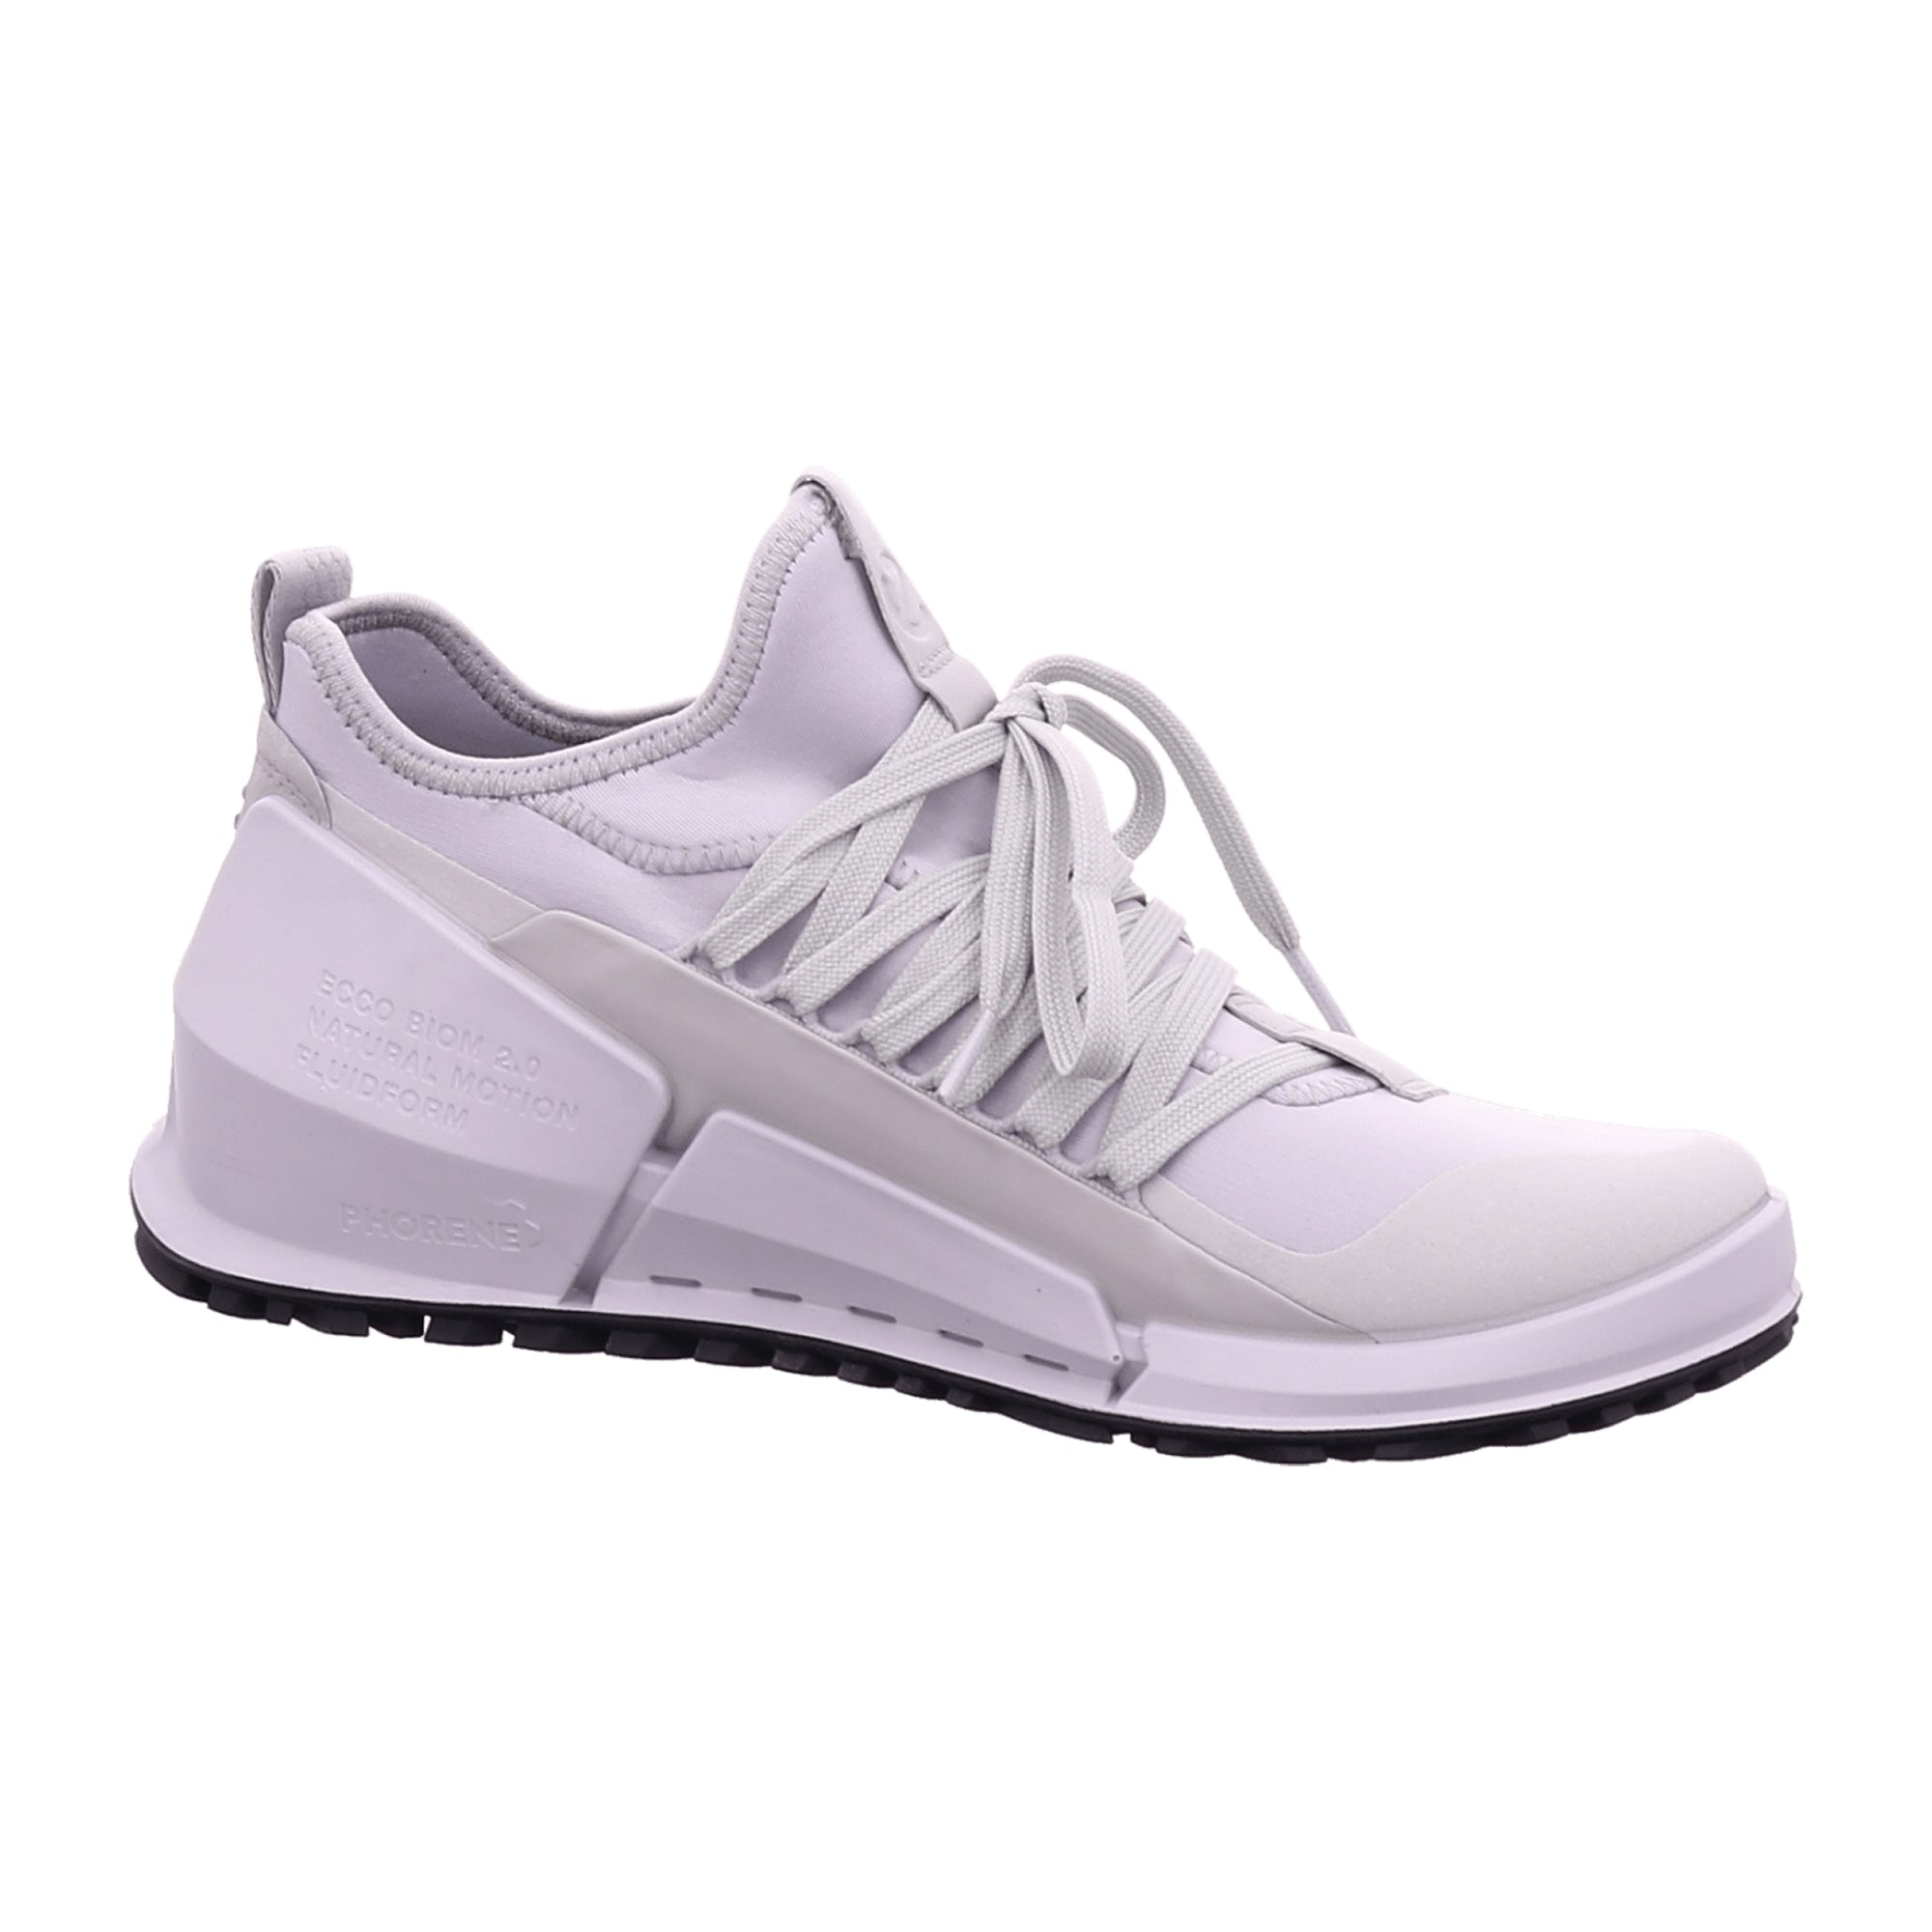 Ecco BIOM 2.0 M Men's Sneakers Grey | Stylish & Comfortable Sports Shoes for Active Lifestyle